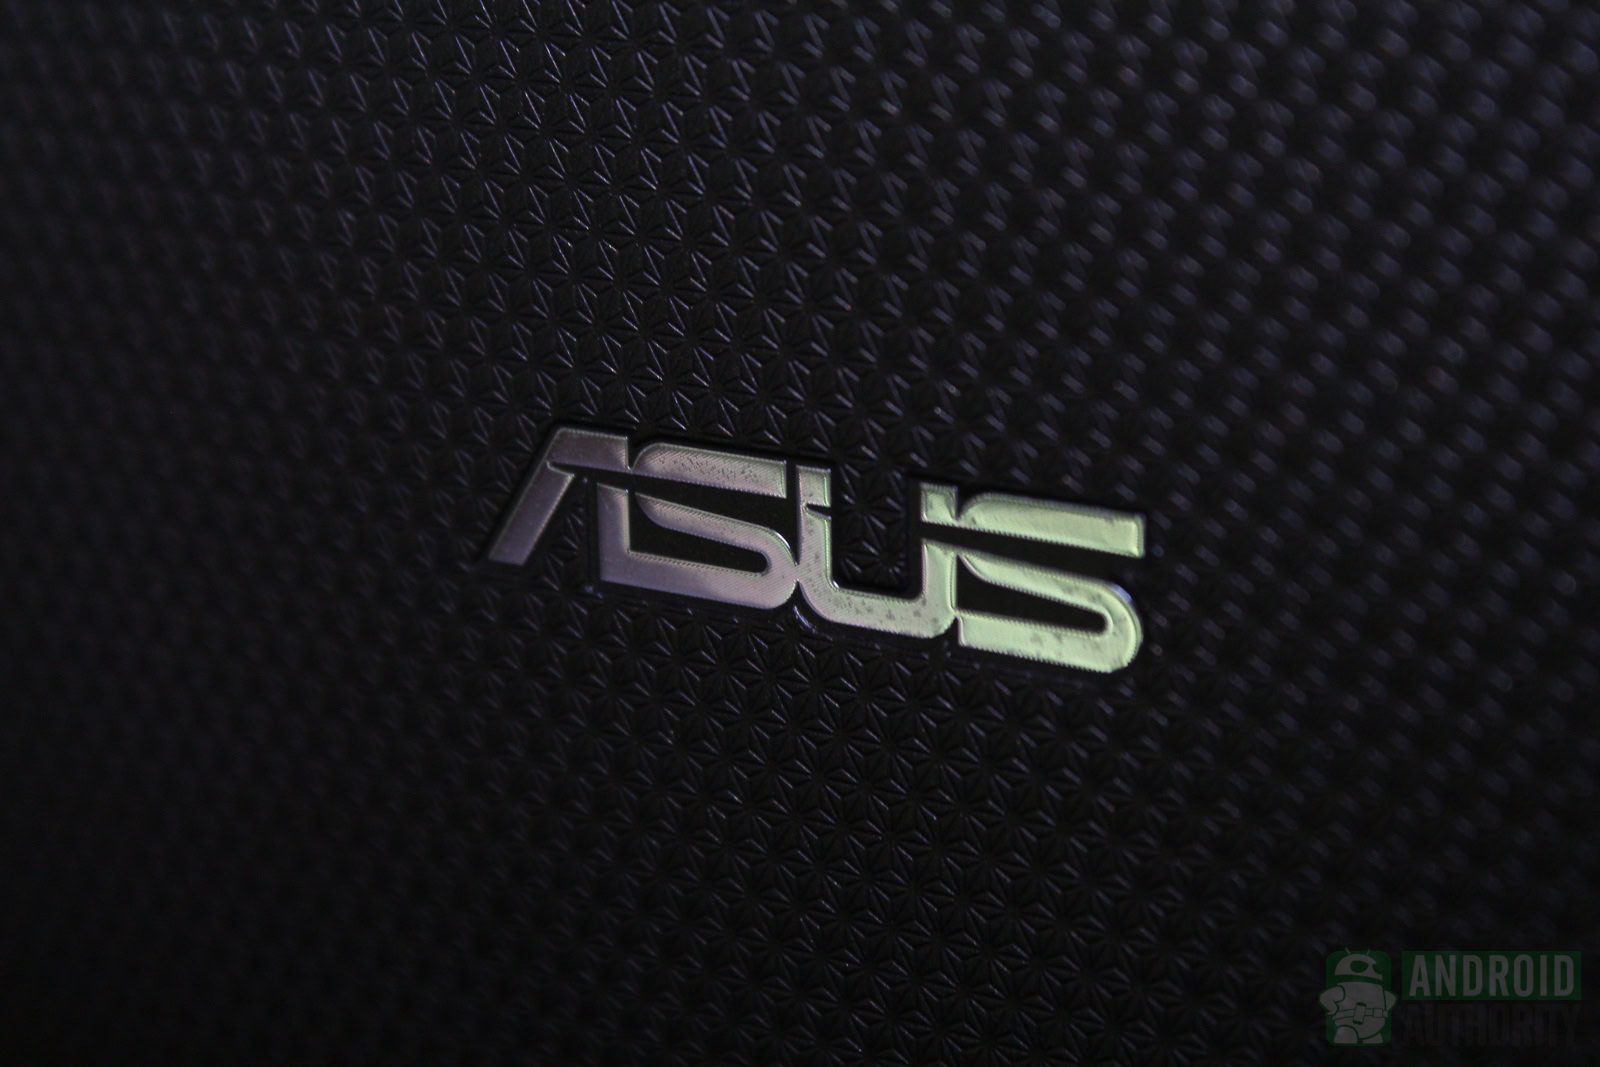 Asus Nexus 10 spotted in another inventory list, this one from Currys